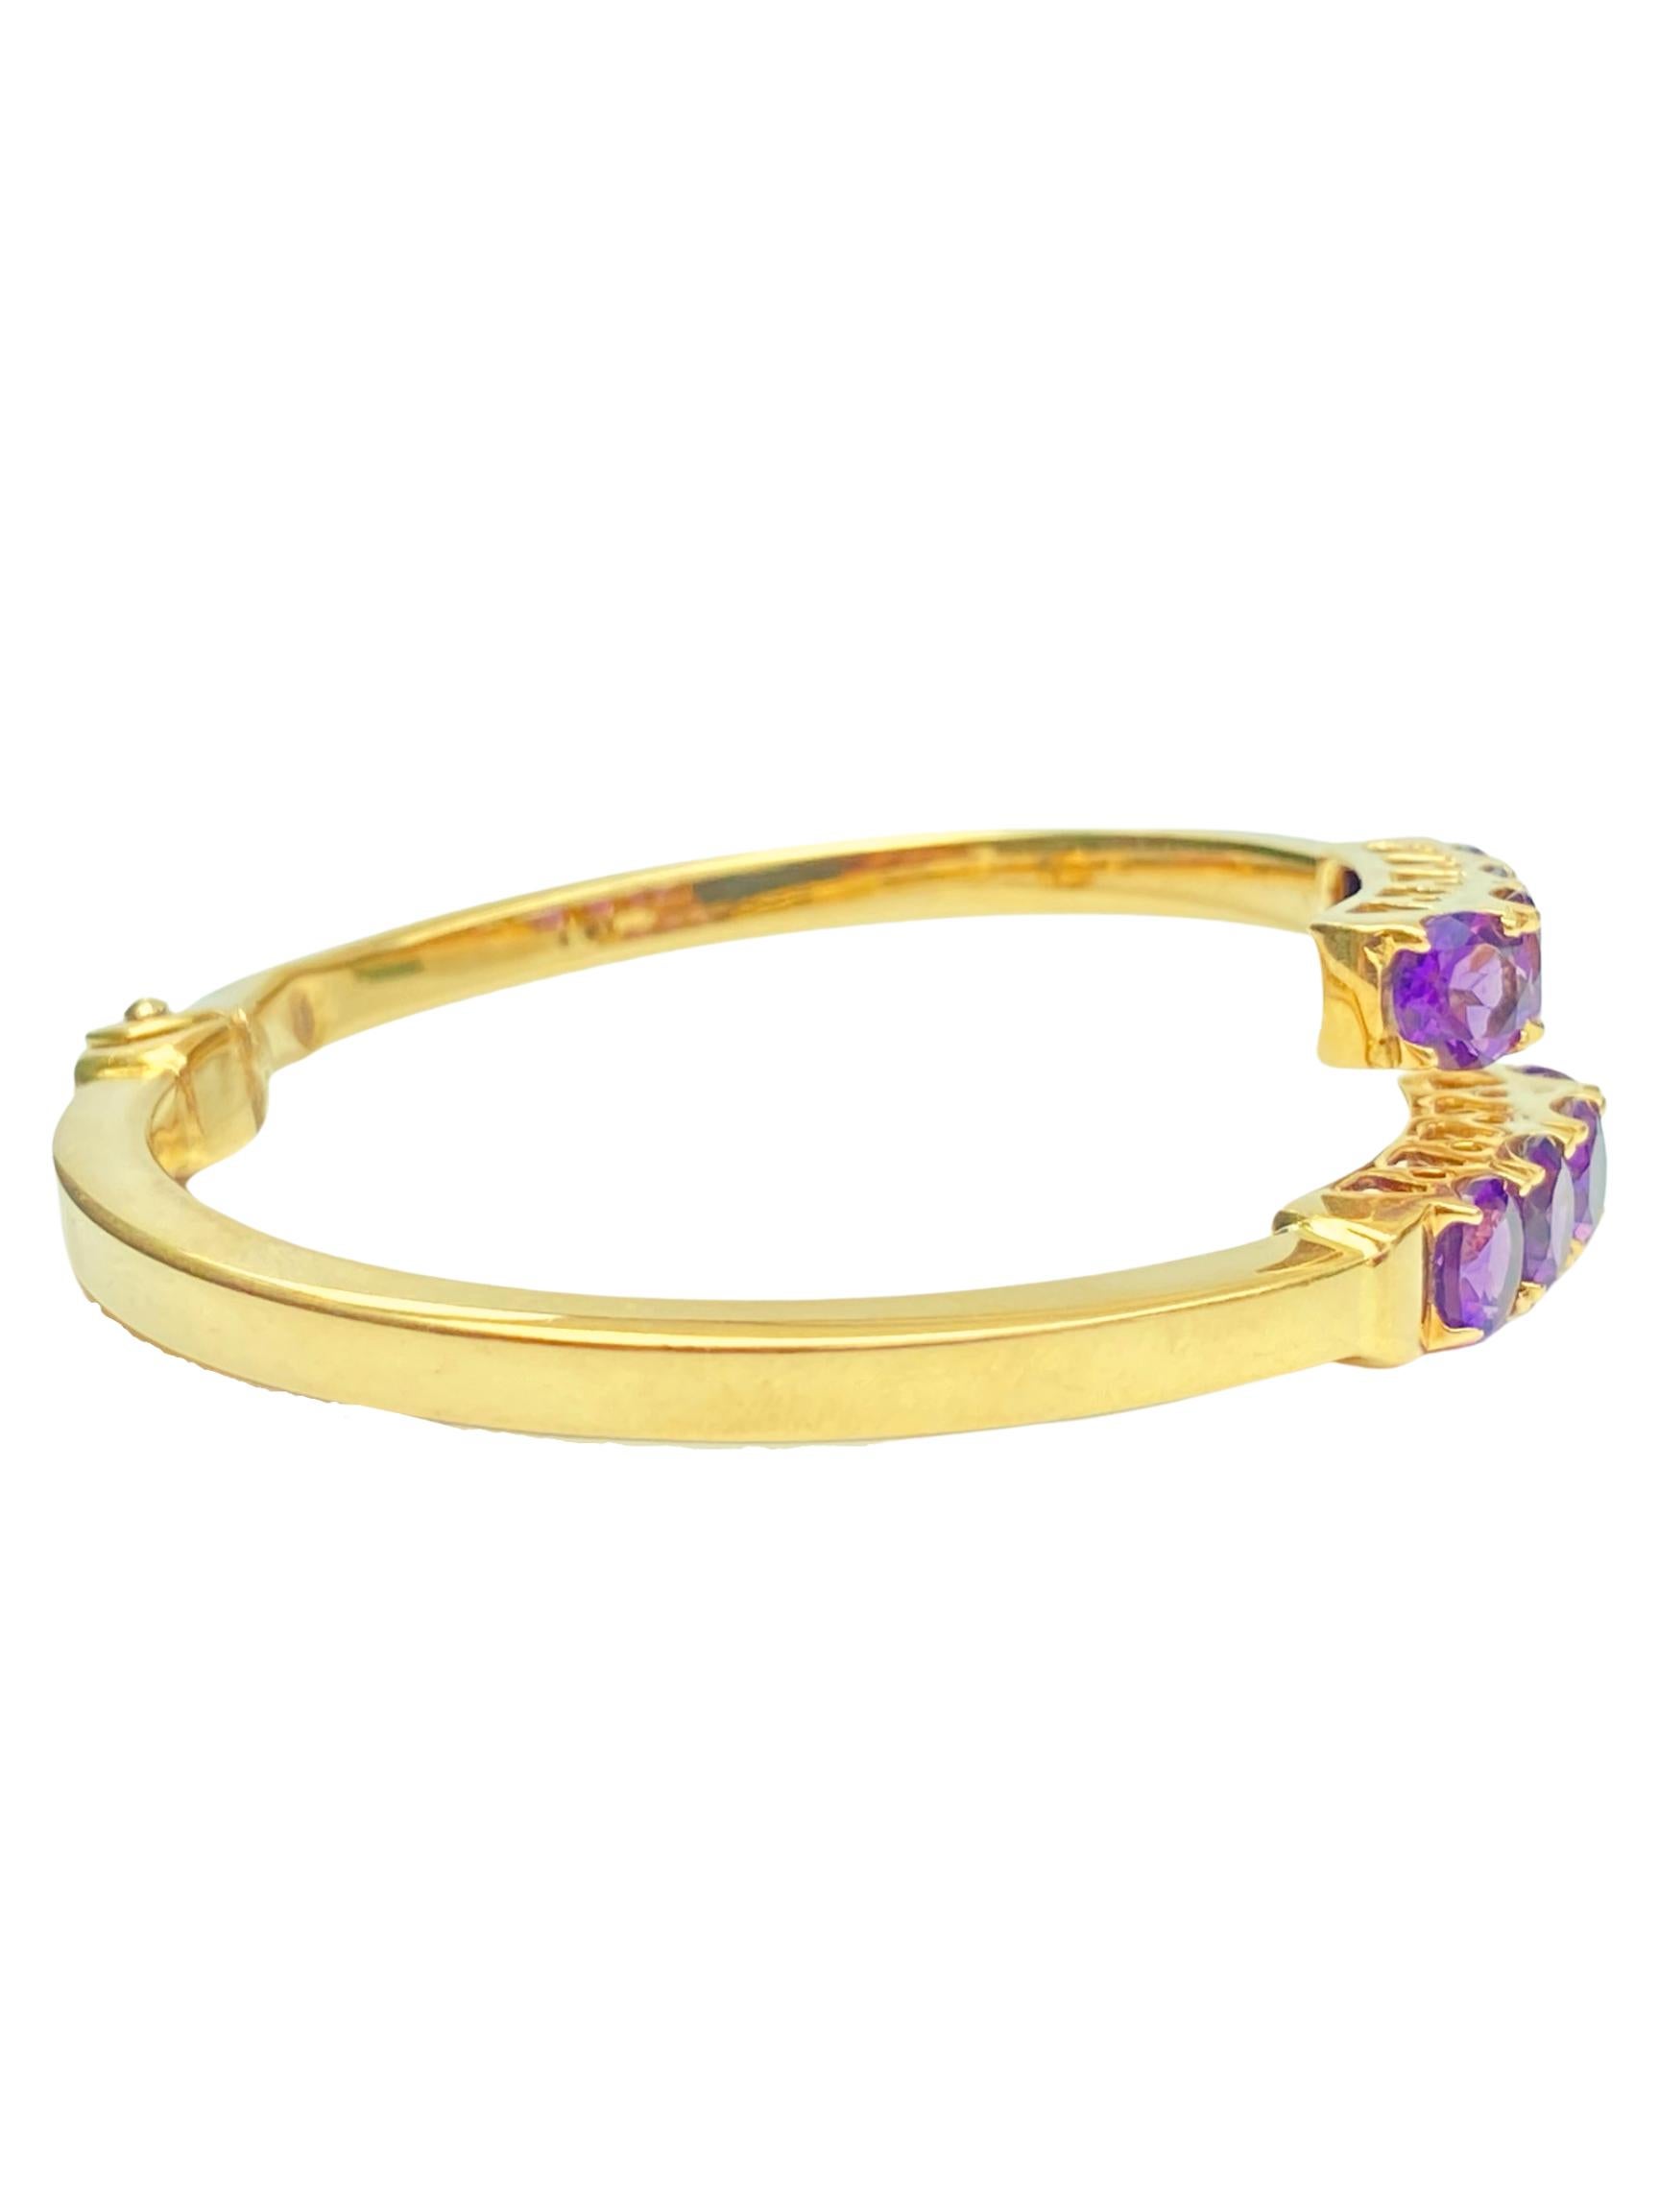 Modern 6.50 Carats Round-Brilliant Cut Purple Amethyst and 18k Yellow Gold Bangle For Sale